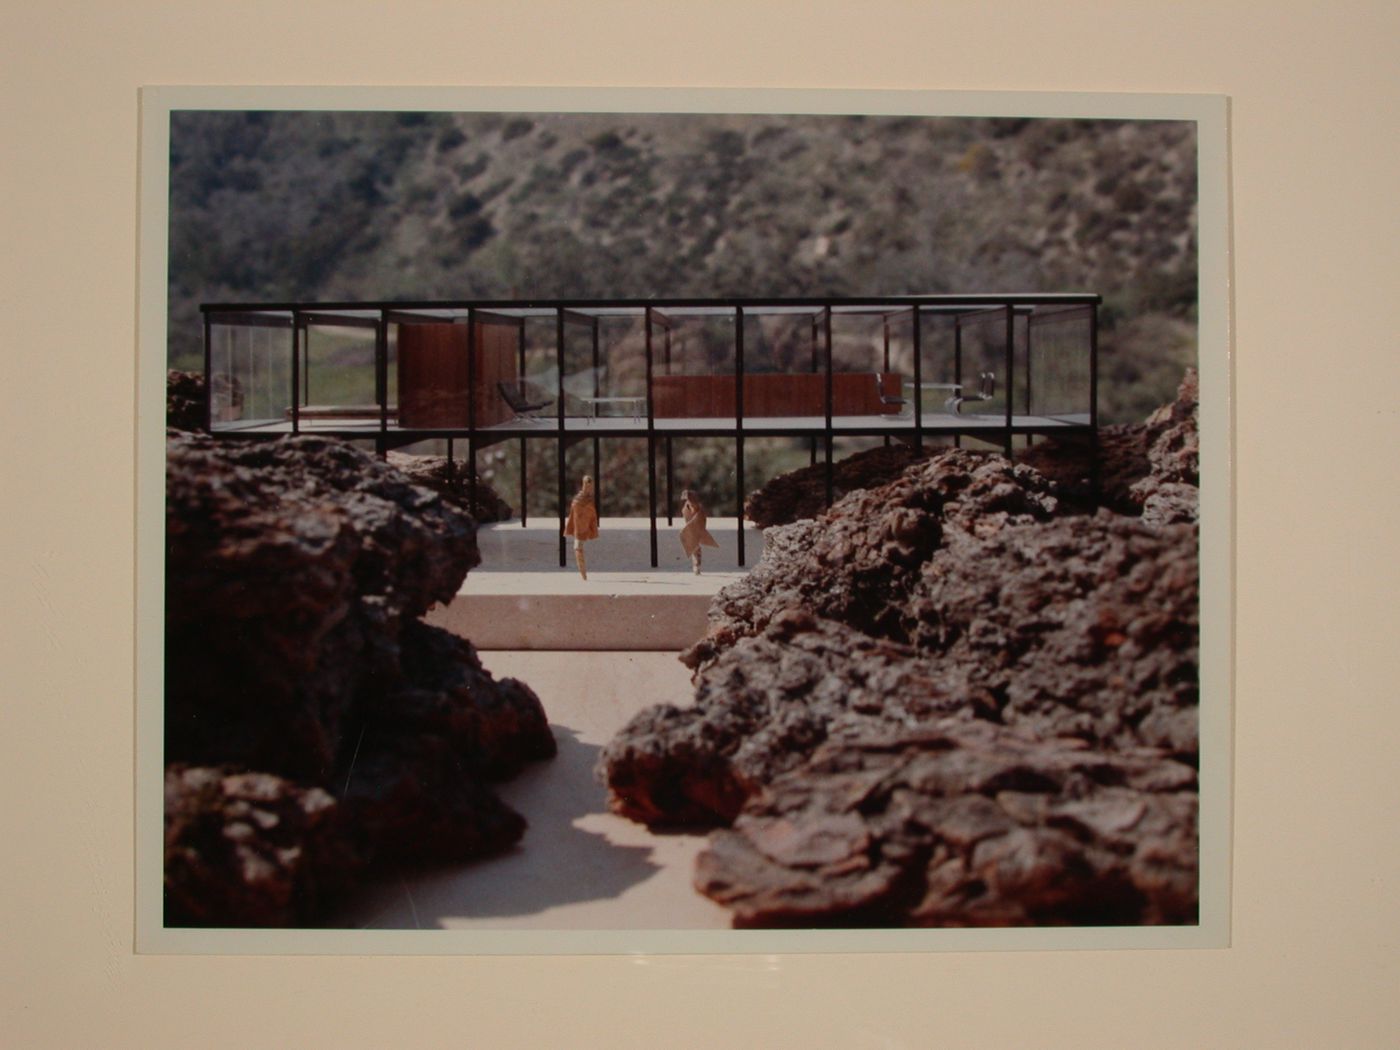 Photograph of a student [?] model for a Canyon House with steel structural framework